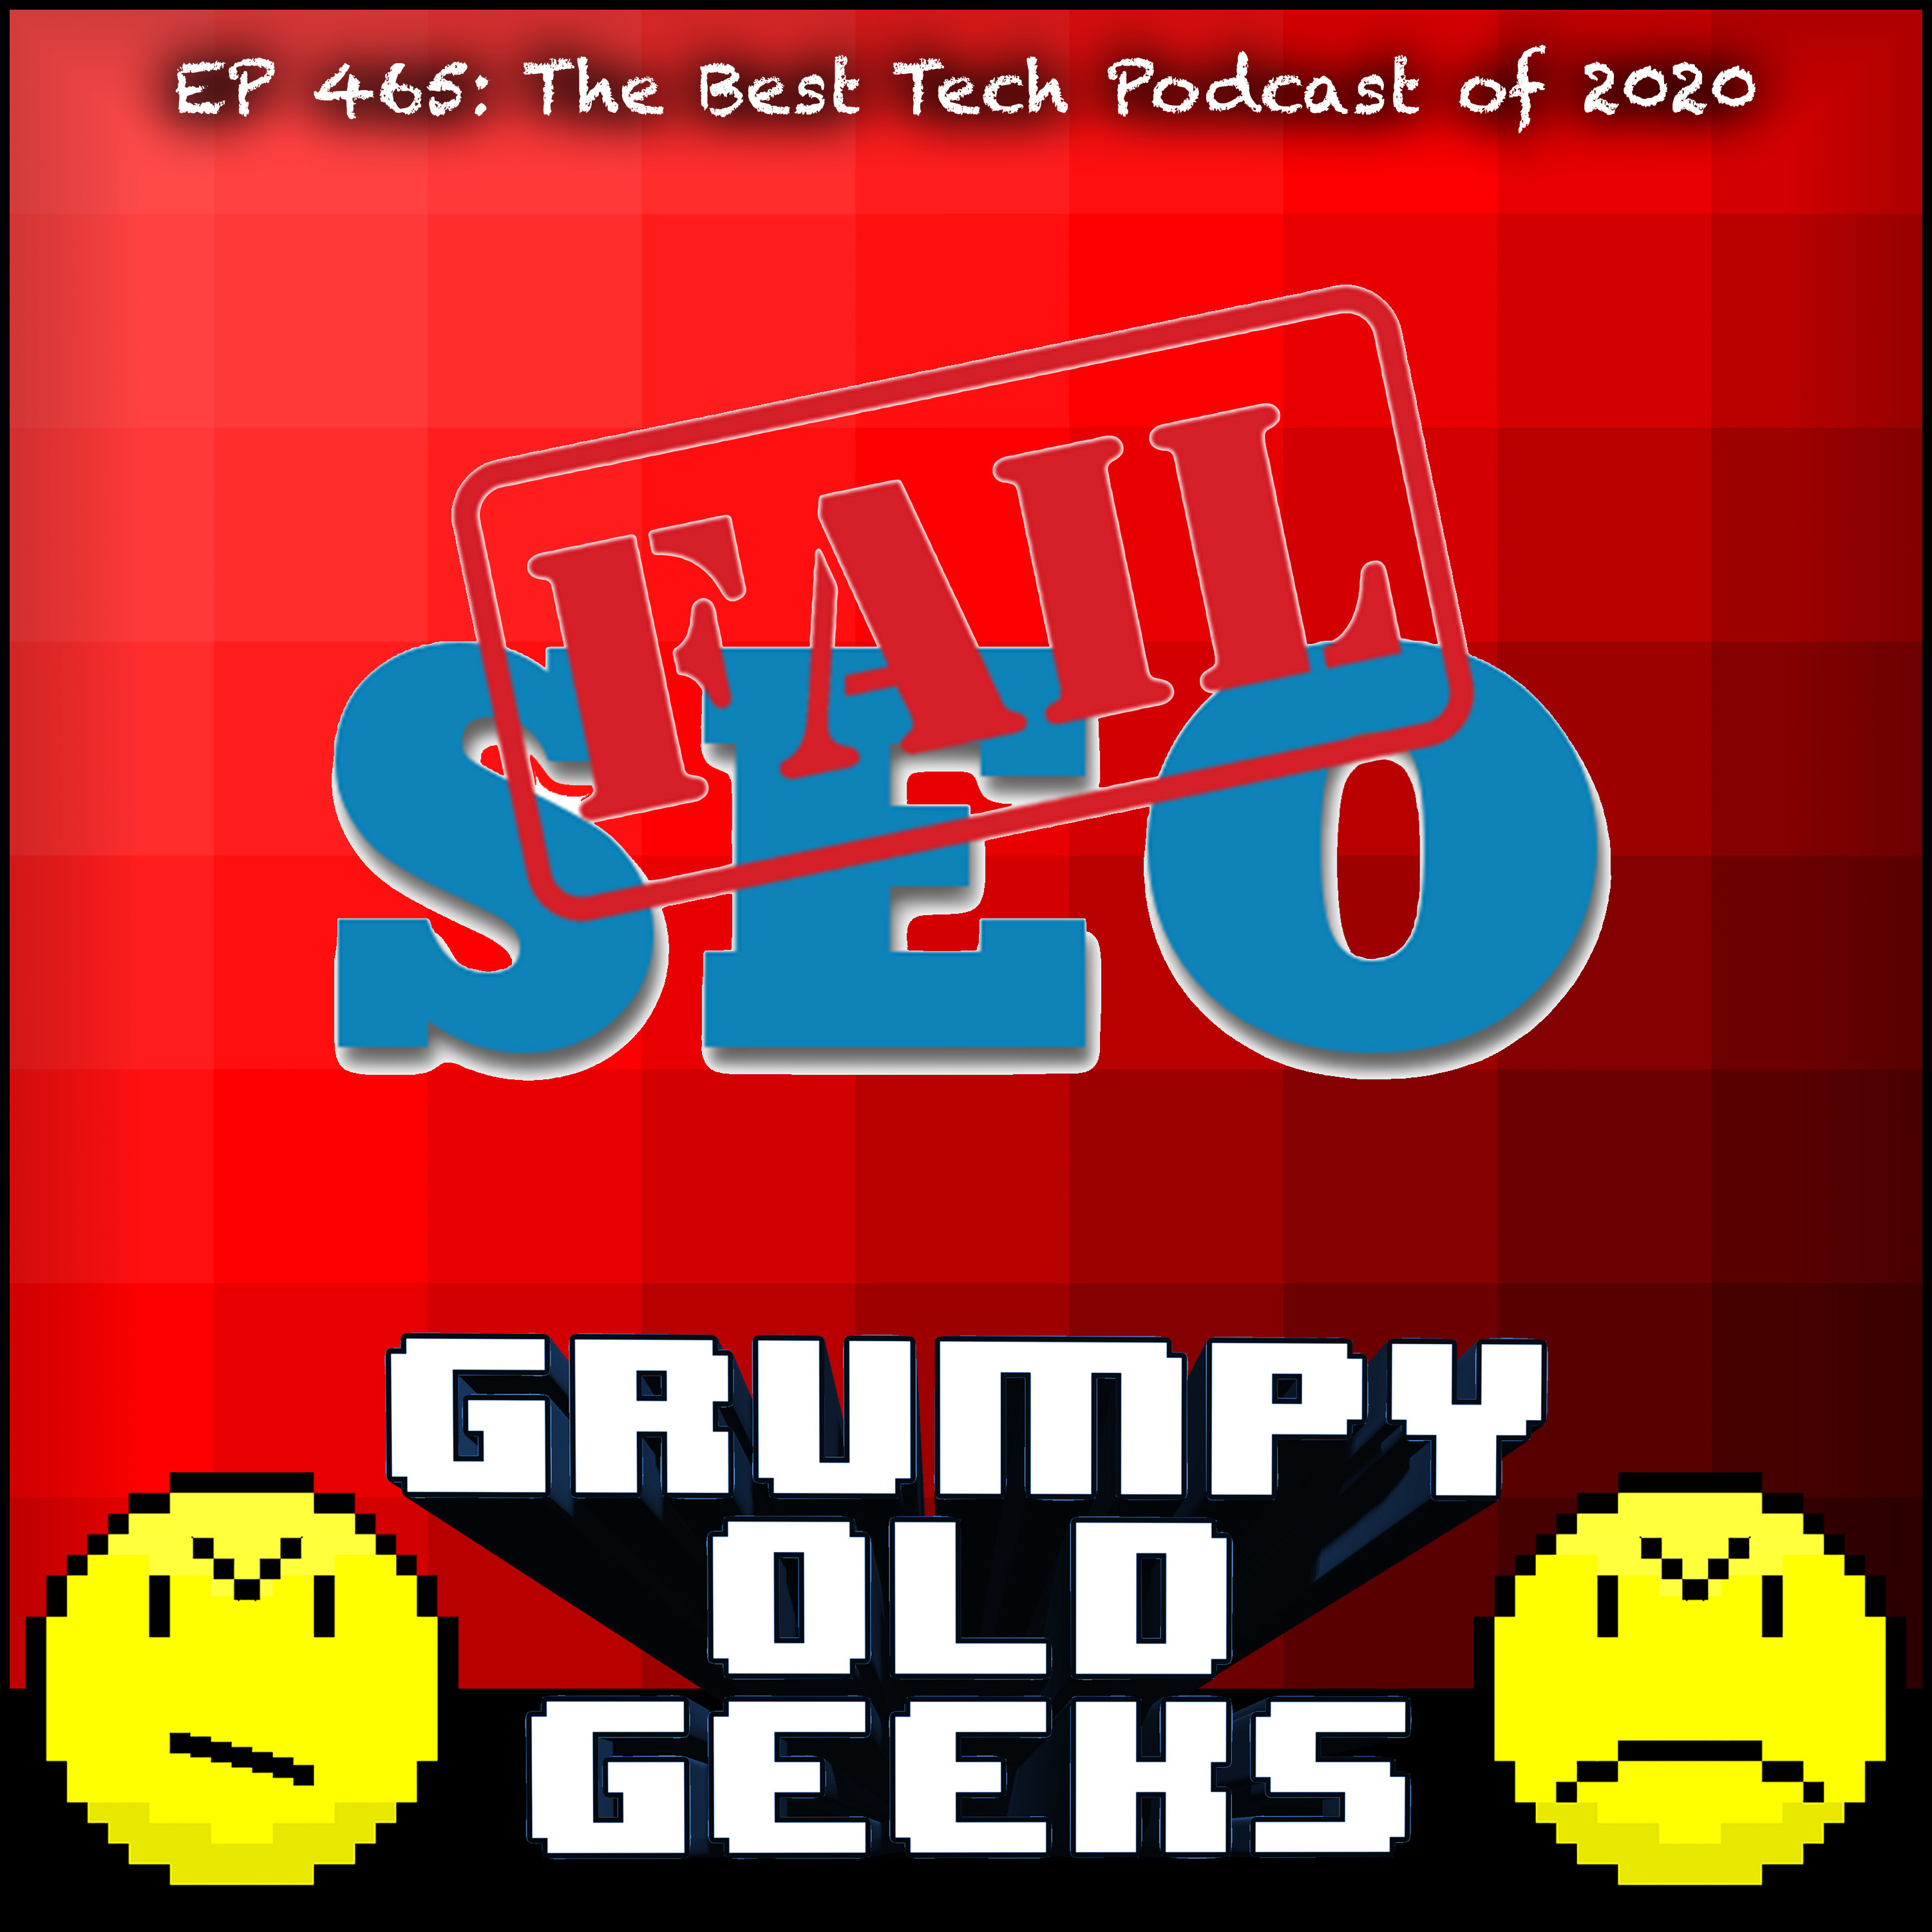 465: The Best Tech Podcast of 2020